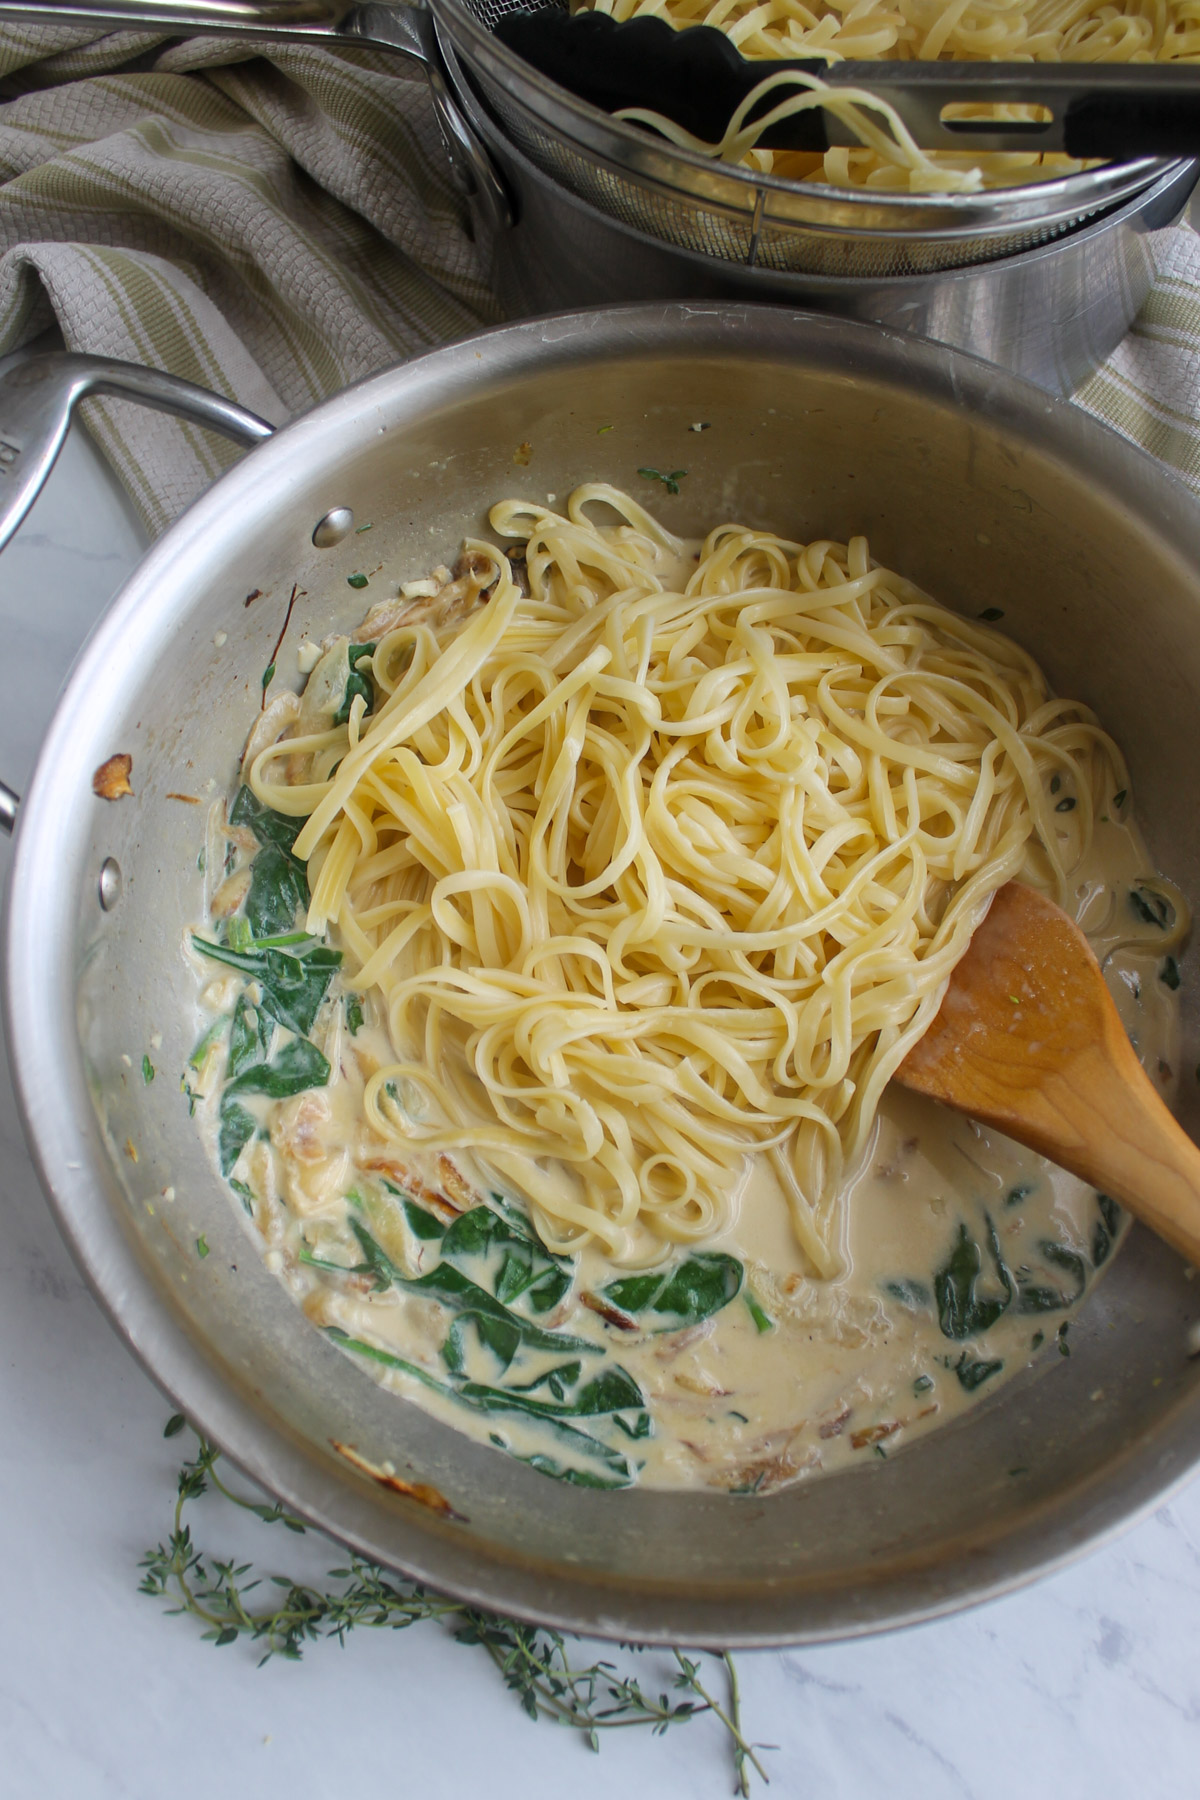 Adding the linguine to toss with the cream sauce.